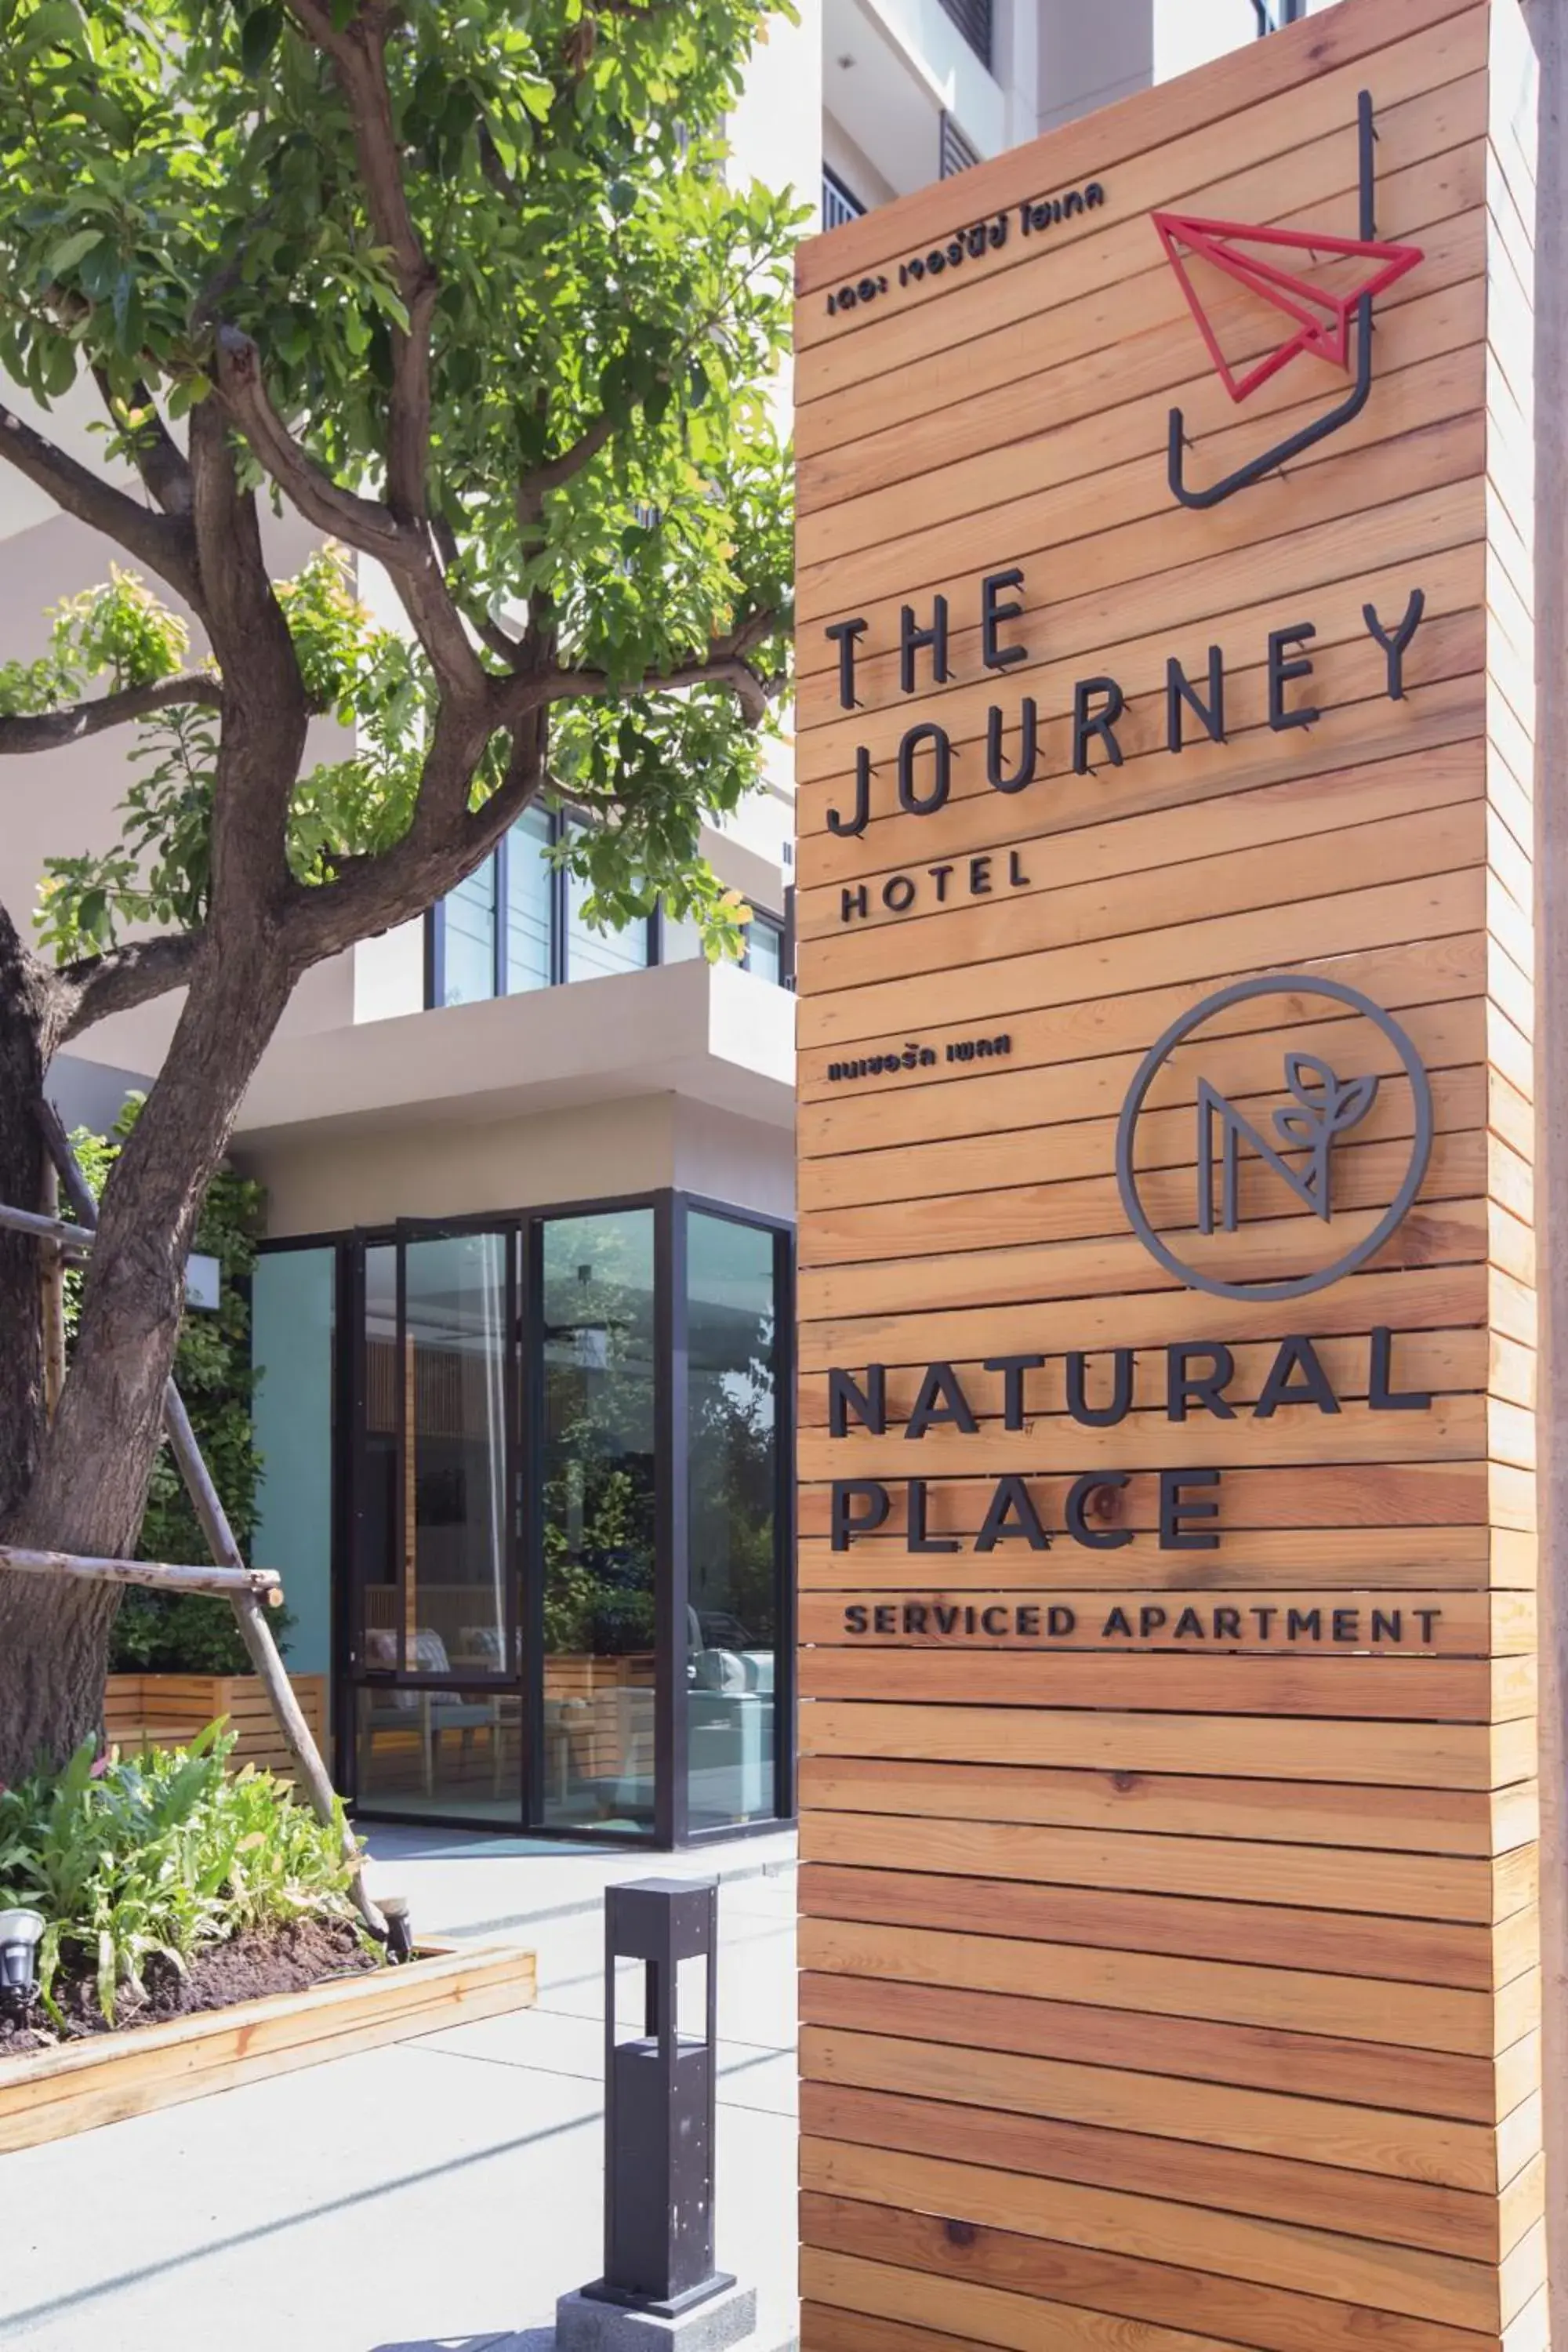 Property logo or sign, Facade/Entrance in The Journey Hotel Laksi